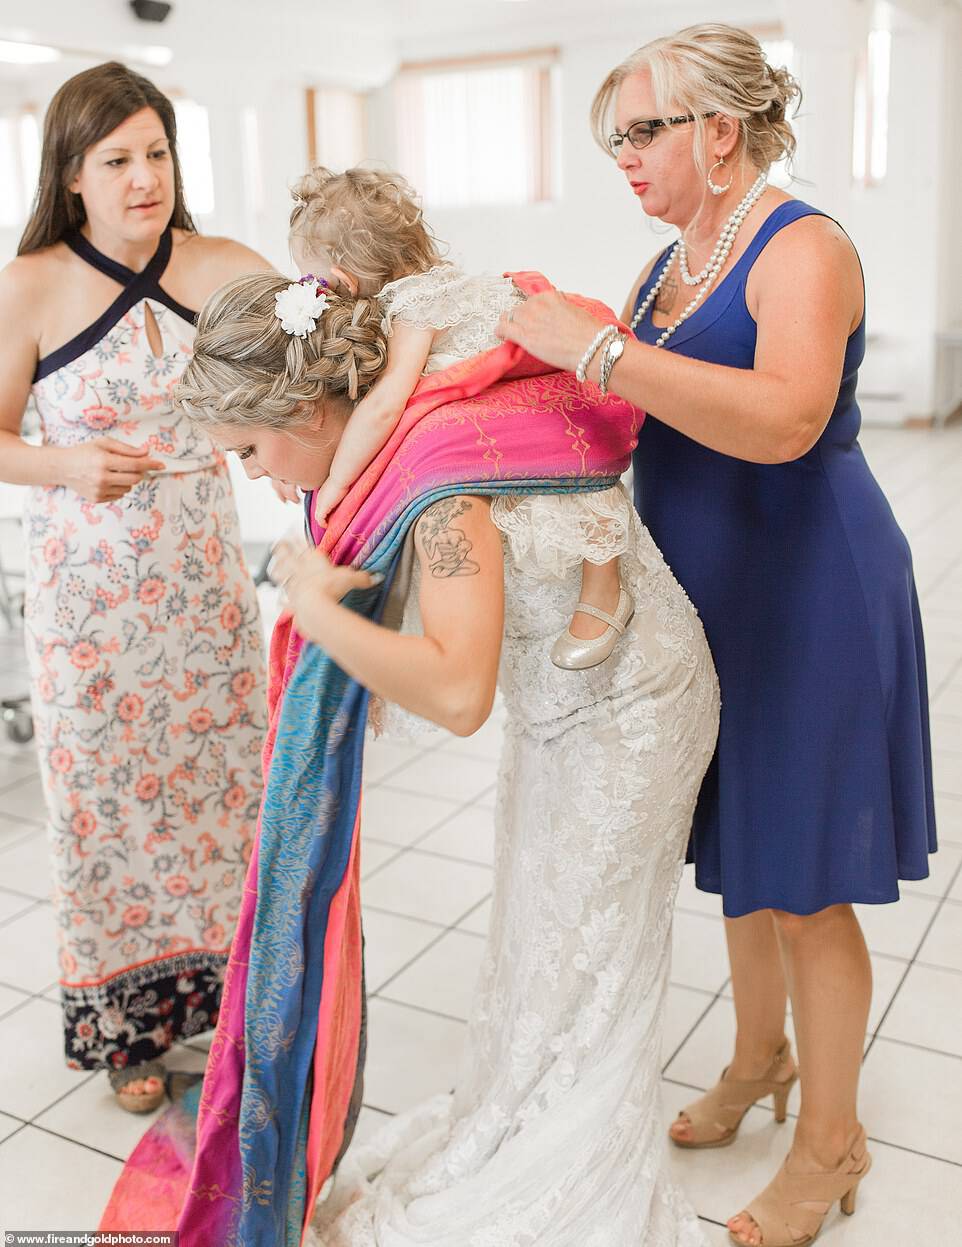 Memorable: Dalton's wedding photos were taken by Ohio-based photographerÂ Laura Schaefer of Fire and Gold Photography, who was eager to capture a shot of the moment Dalton put the baby on her back